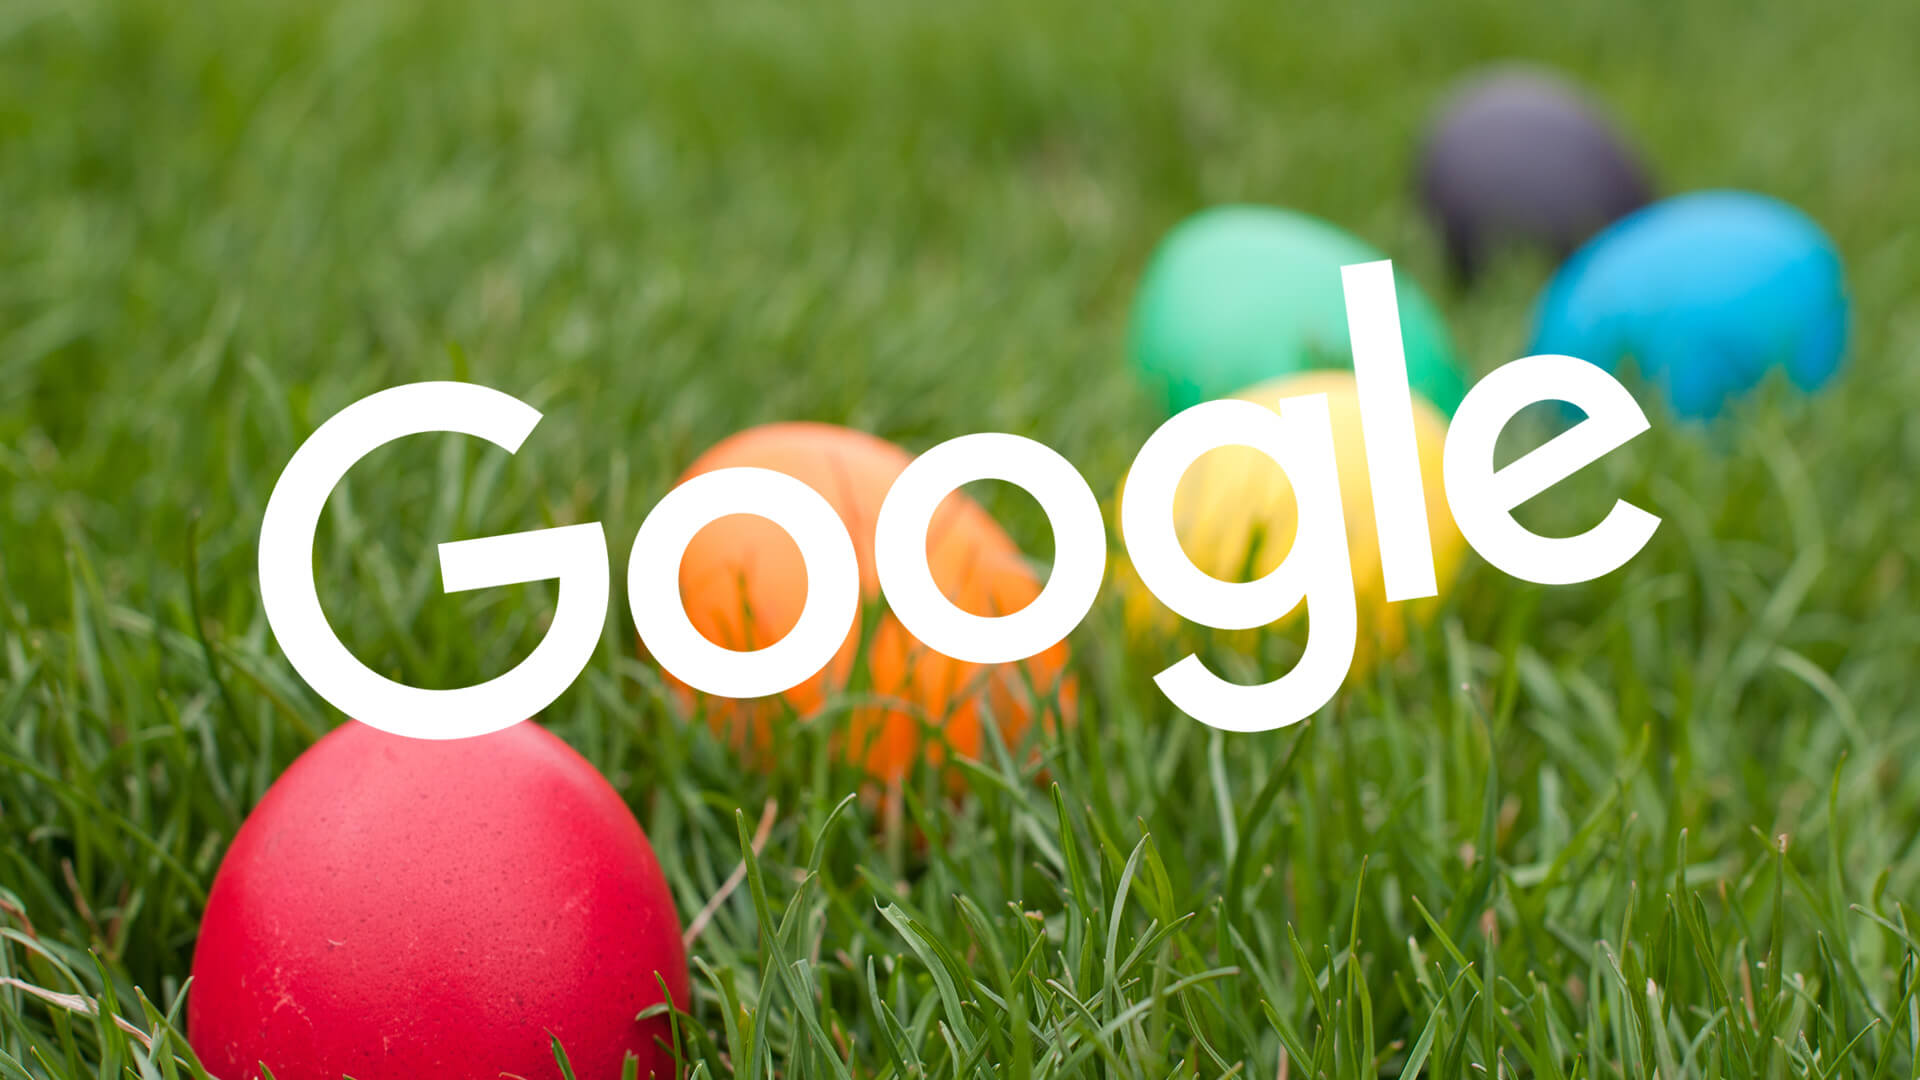 Google's latest Easter Egg is a video game that shows up with